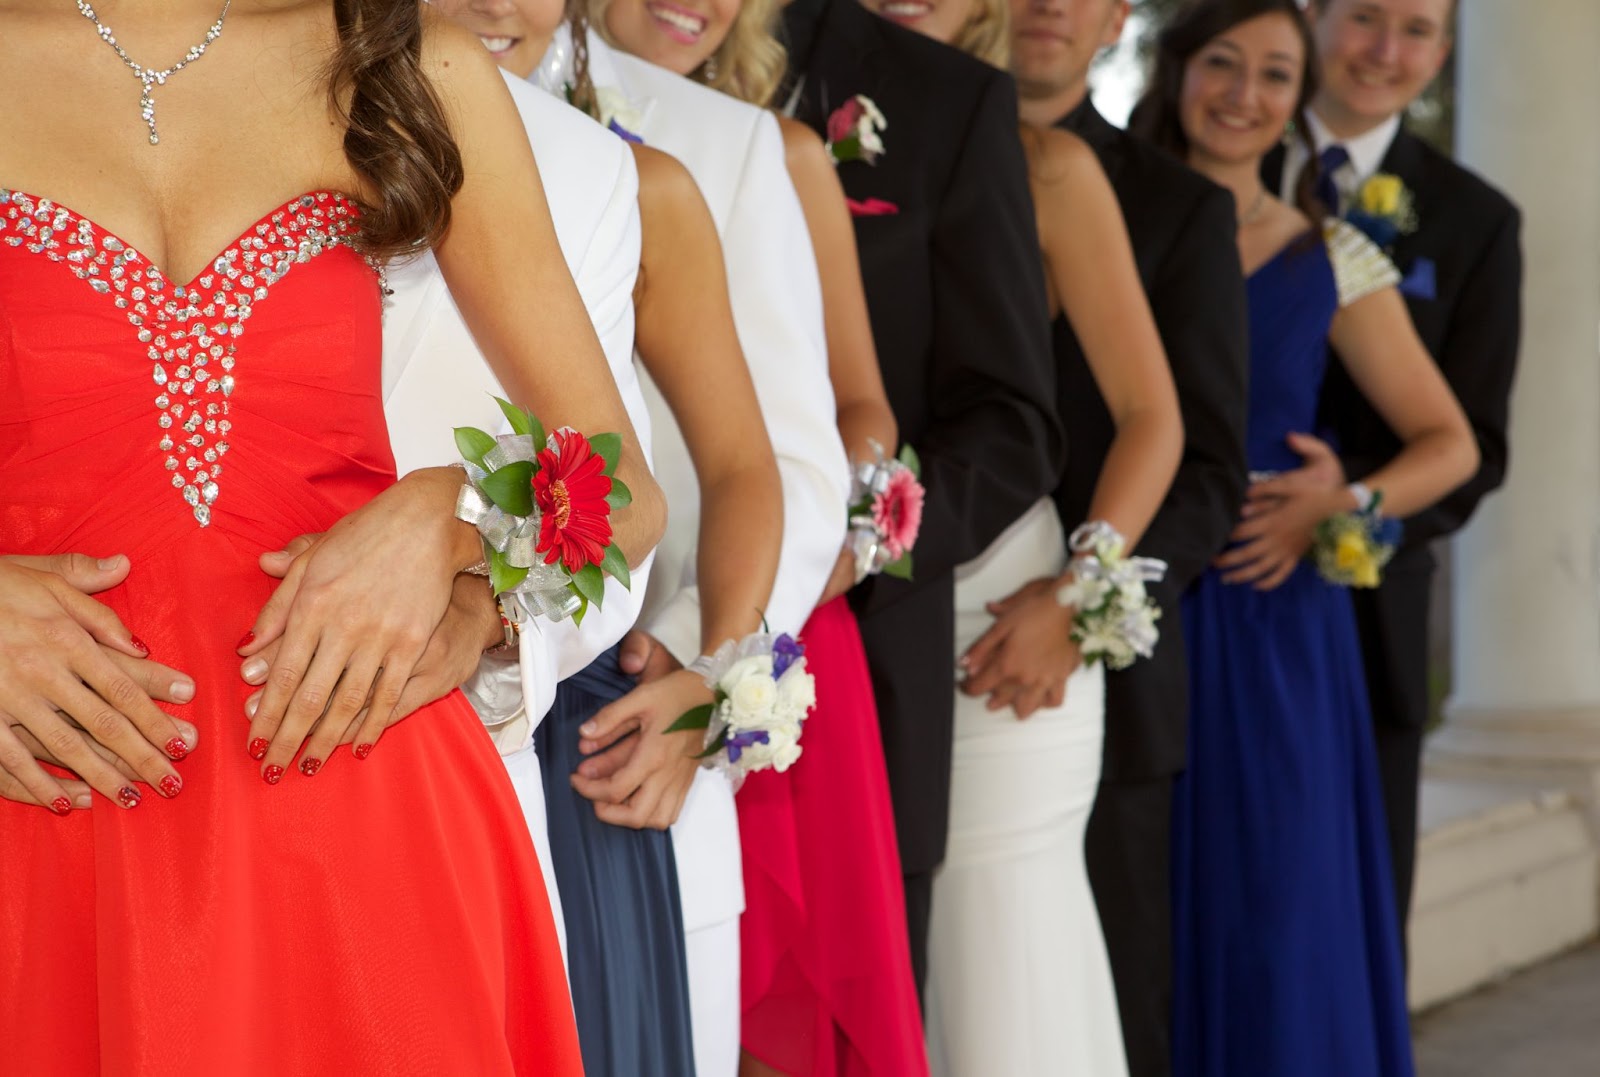 It’s your turn! Here’s our quick and easy prom checklist